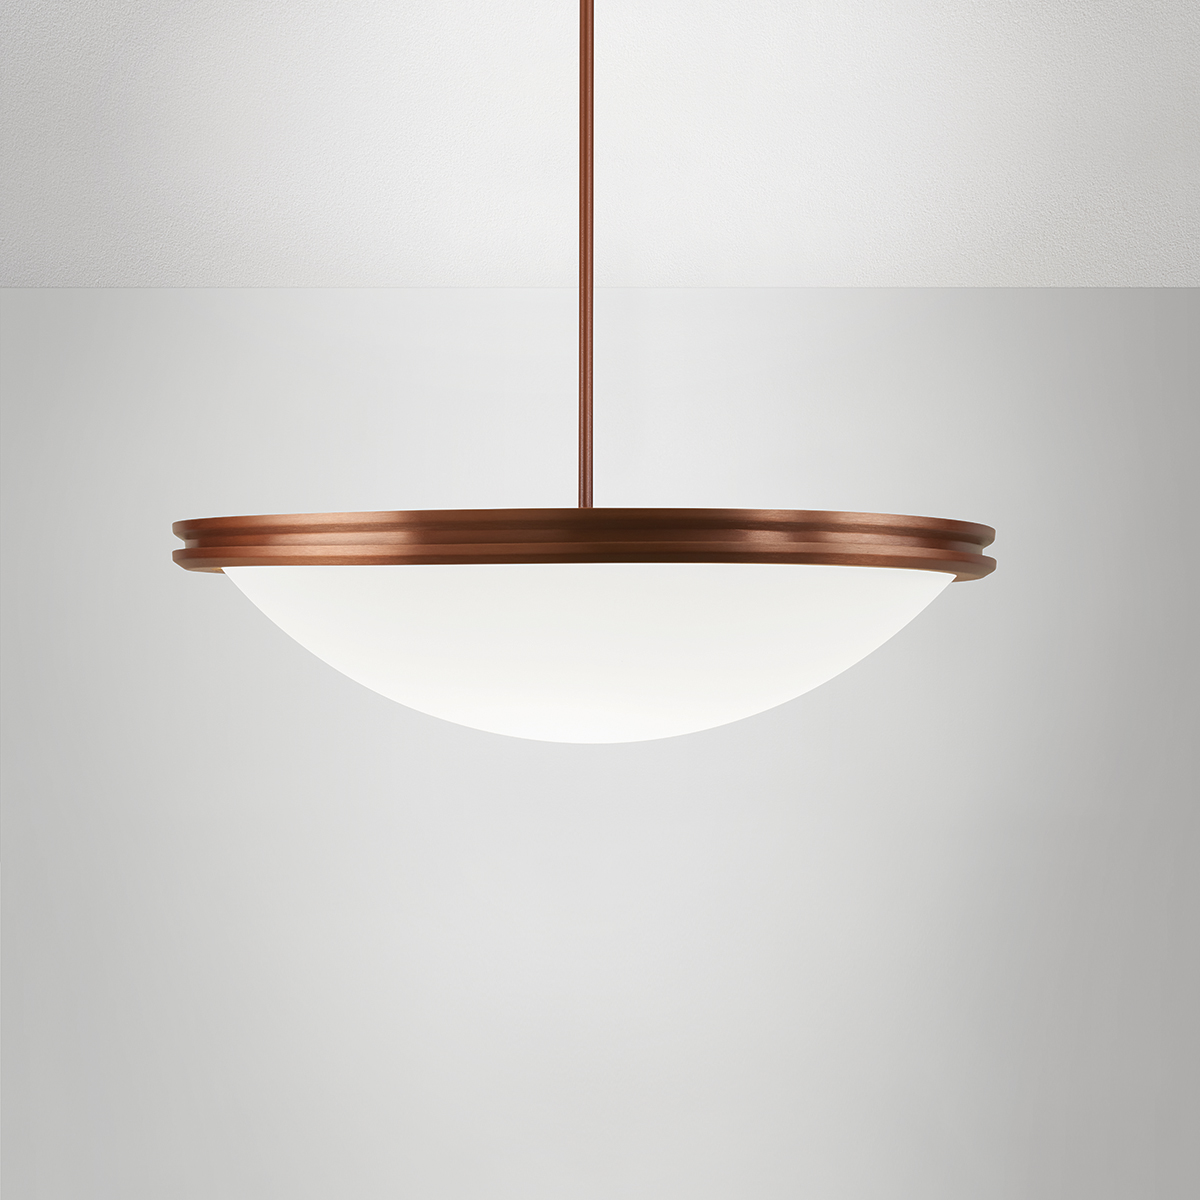 A large bowl pendant suspended with a stem